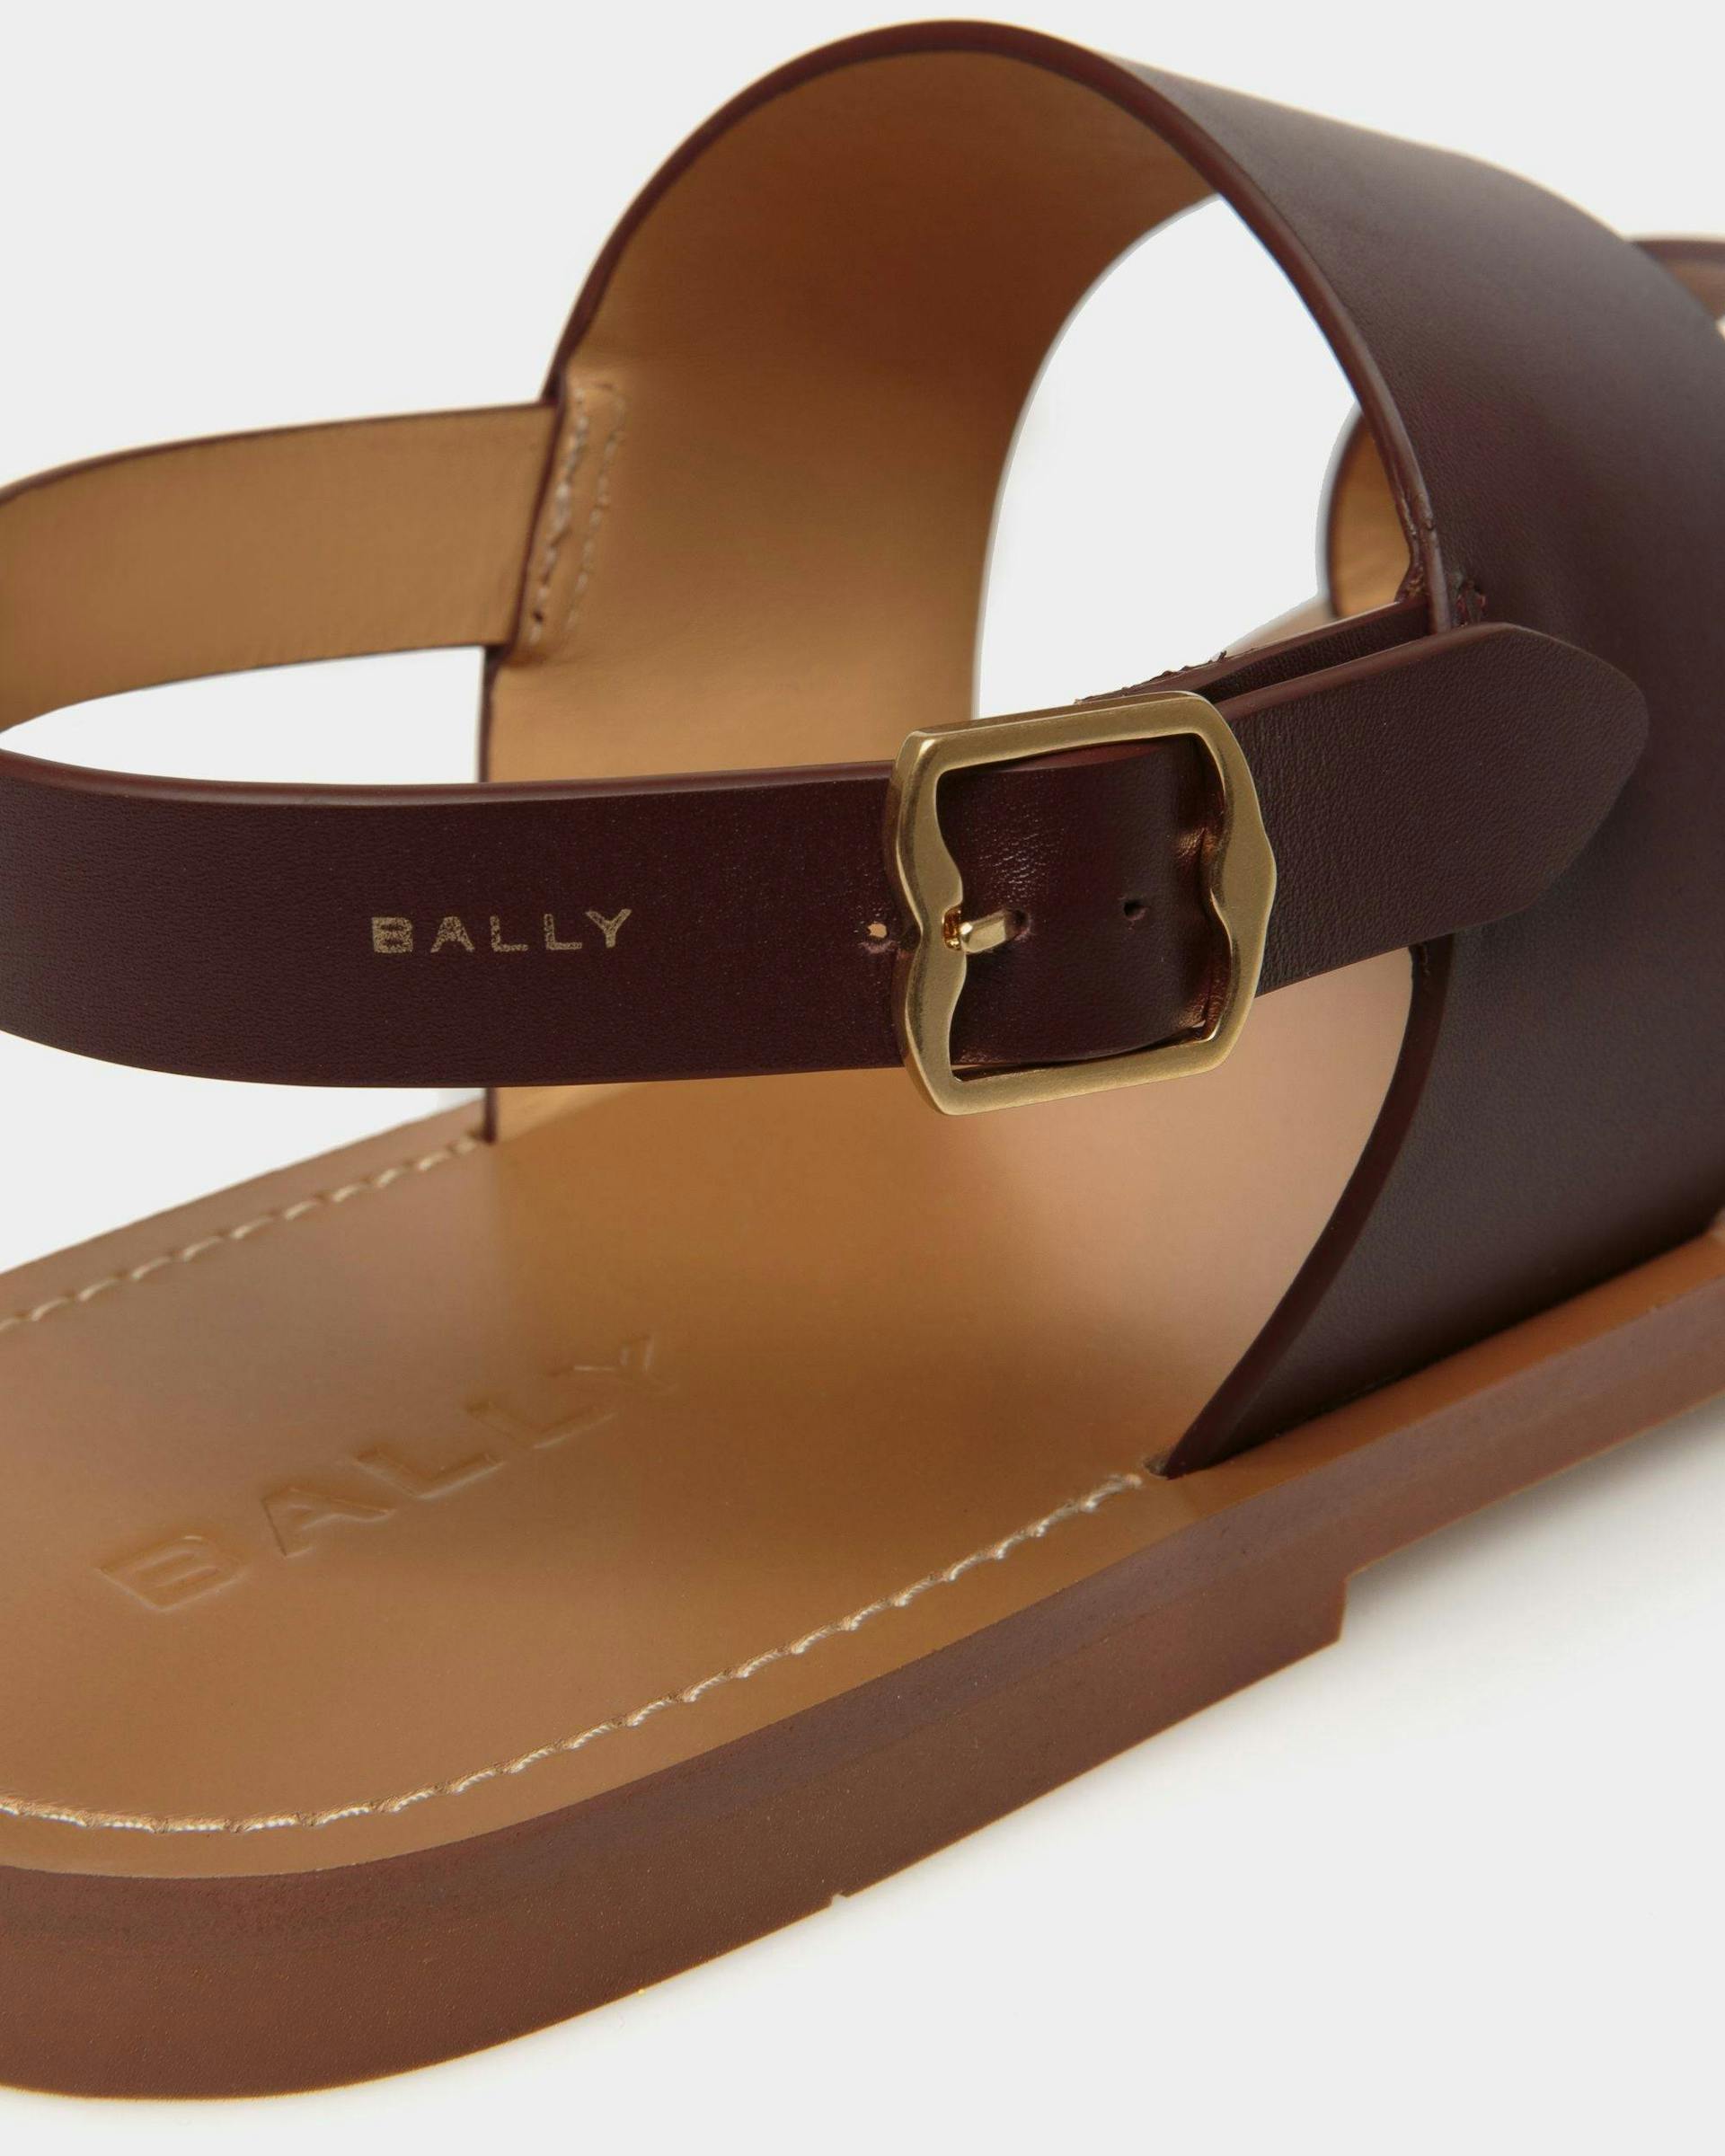 Men's Chateau Sandal in Chestnut Brown Leather | Bally | Still Life Detail